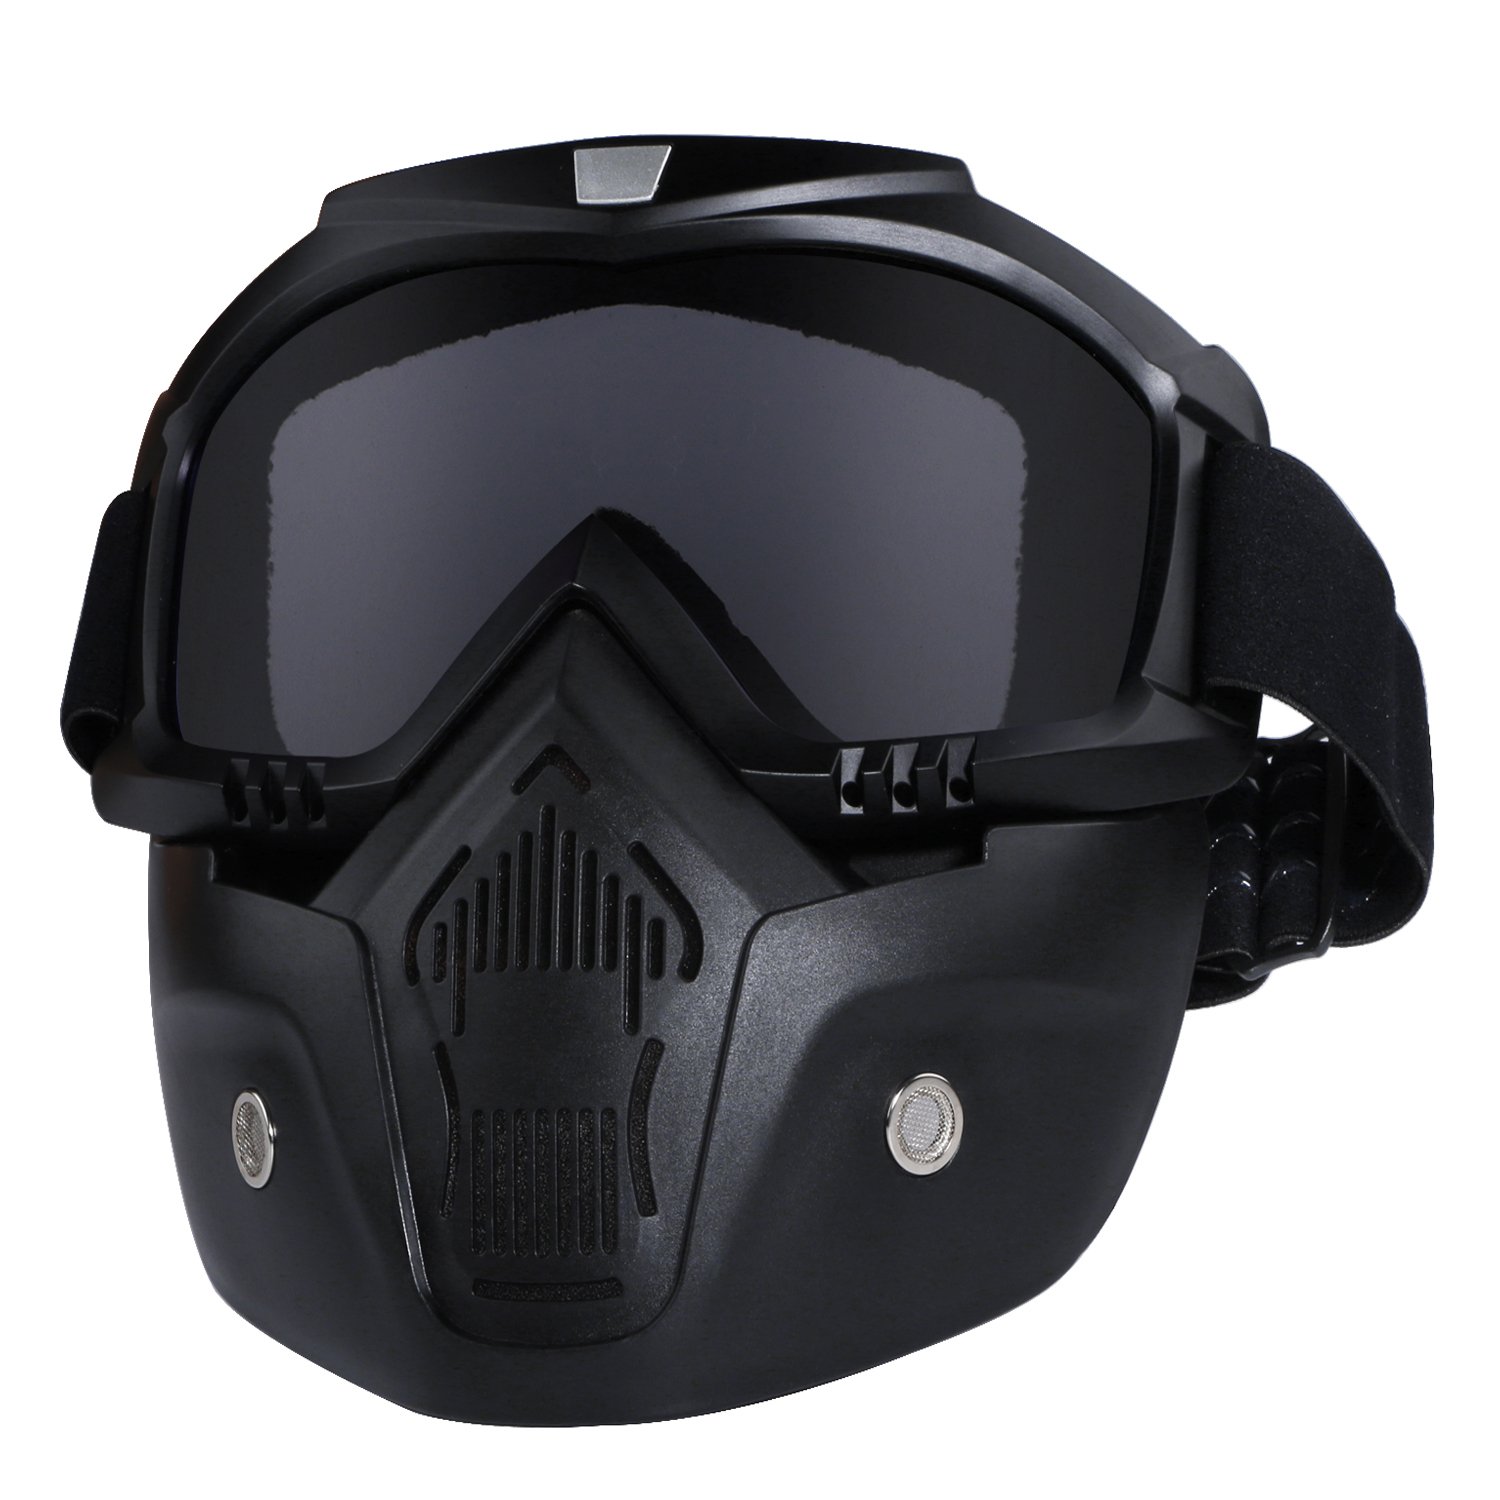 EQWLJWE Full Face Combat Protection Mask Safety Goggles With Visor